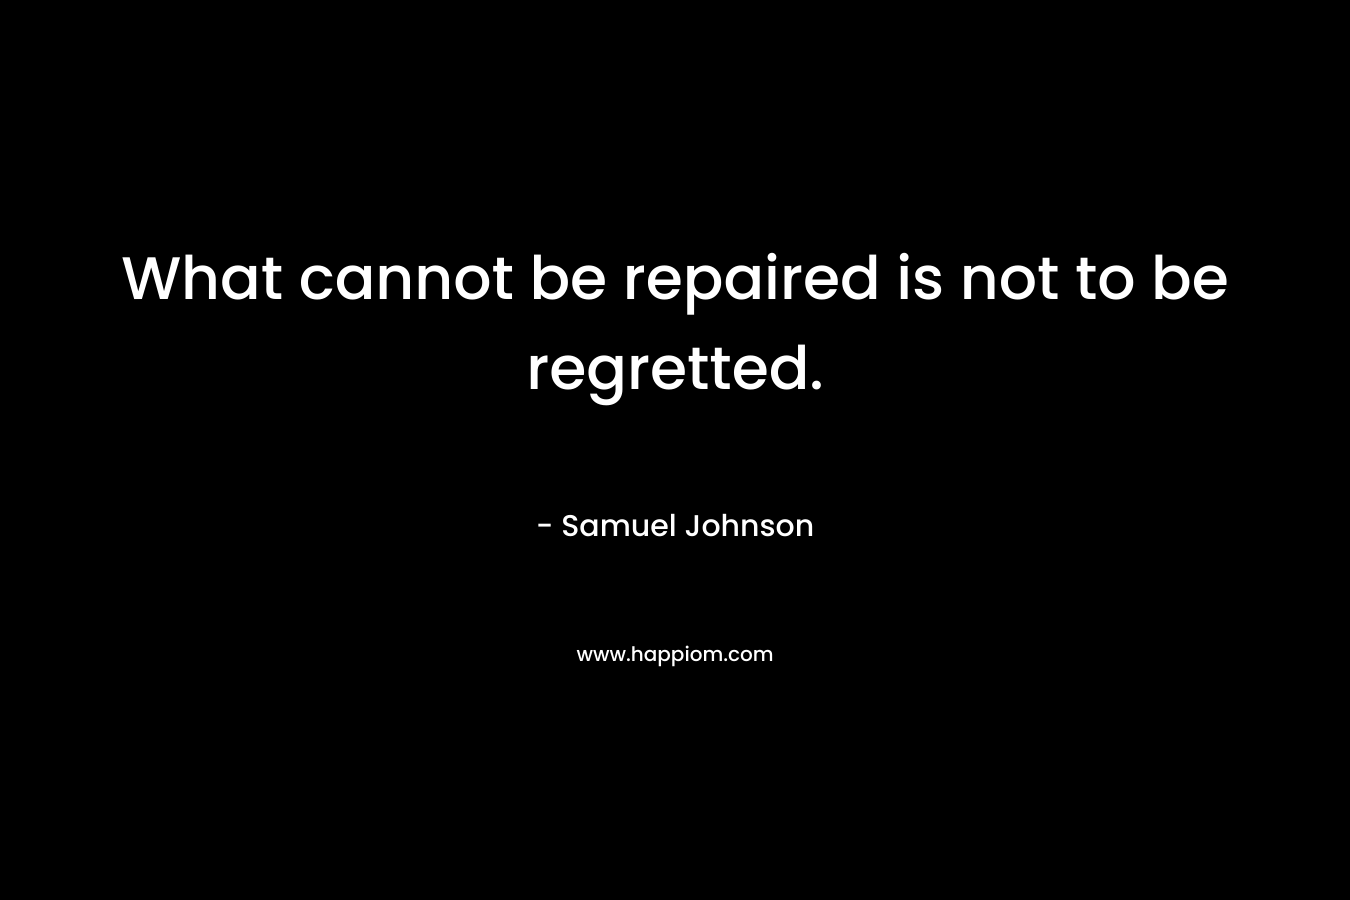 What cannot be repaired is not to be regretted. – Samuel Johnson